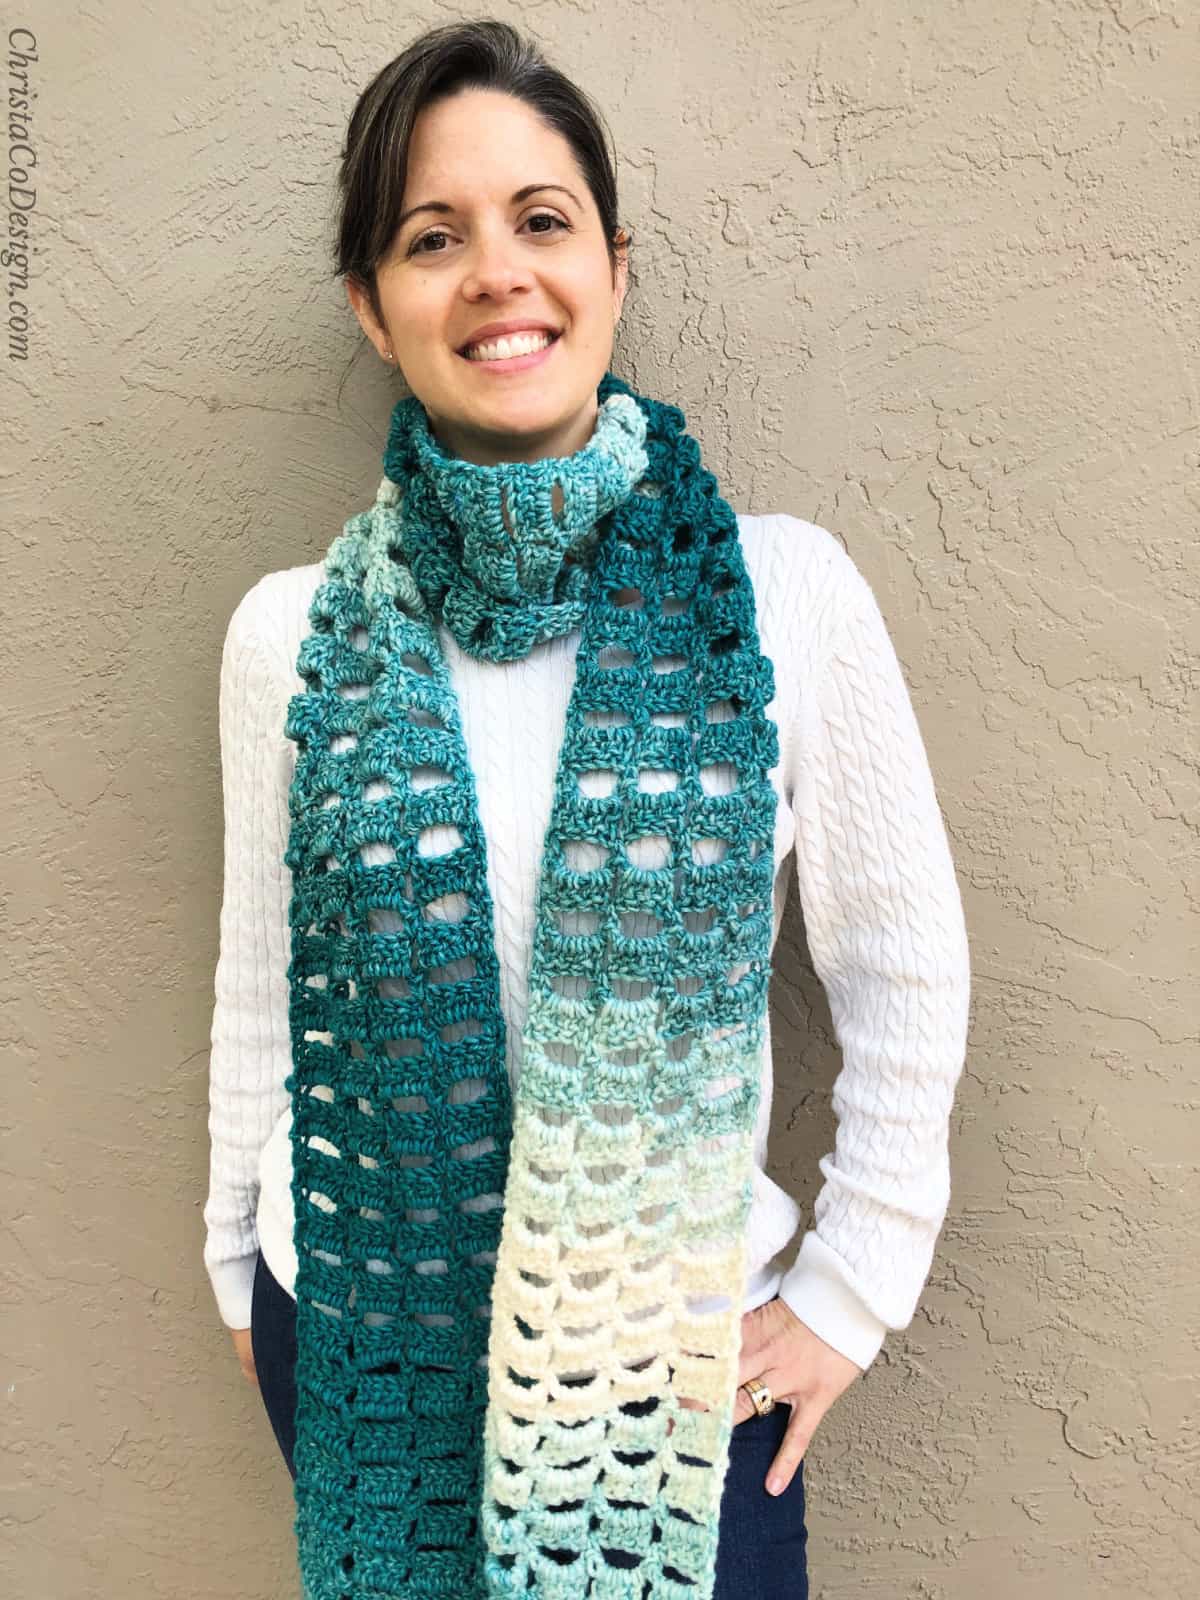 Woman smiling with ombre teal and cream crochet scarf on.